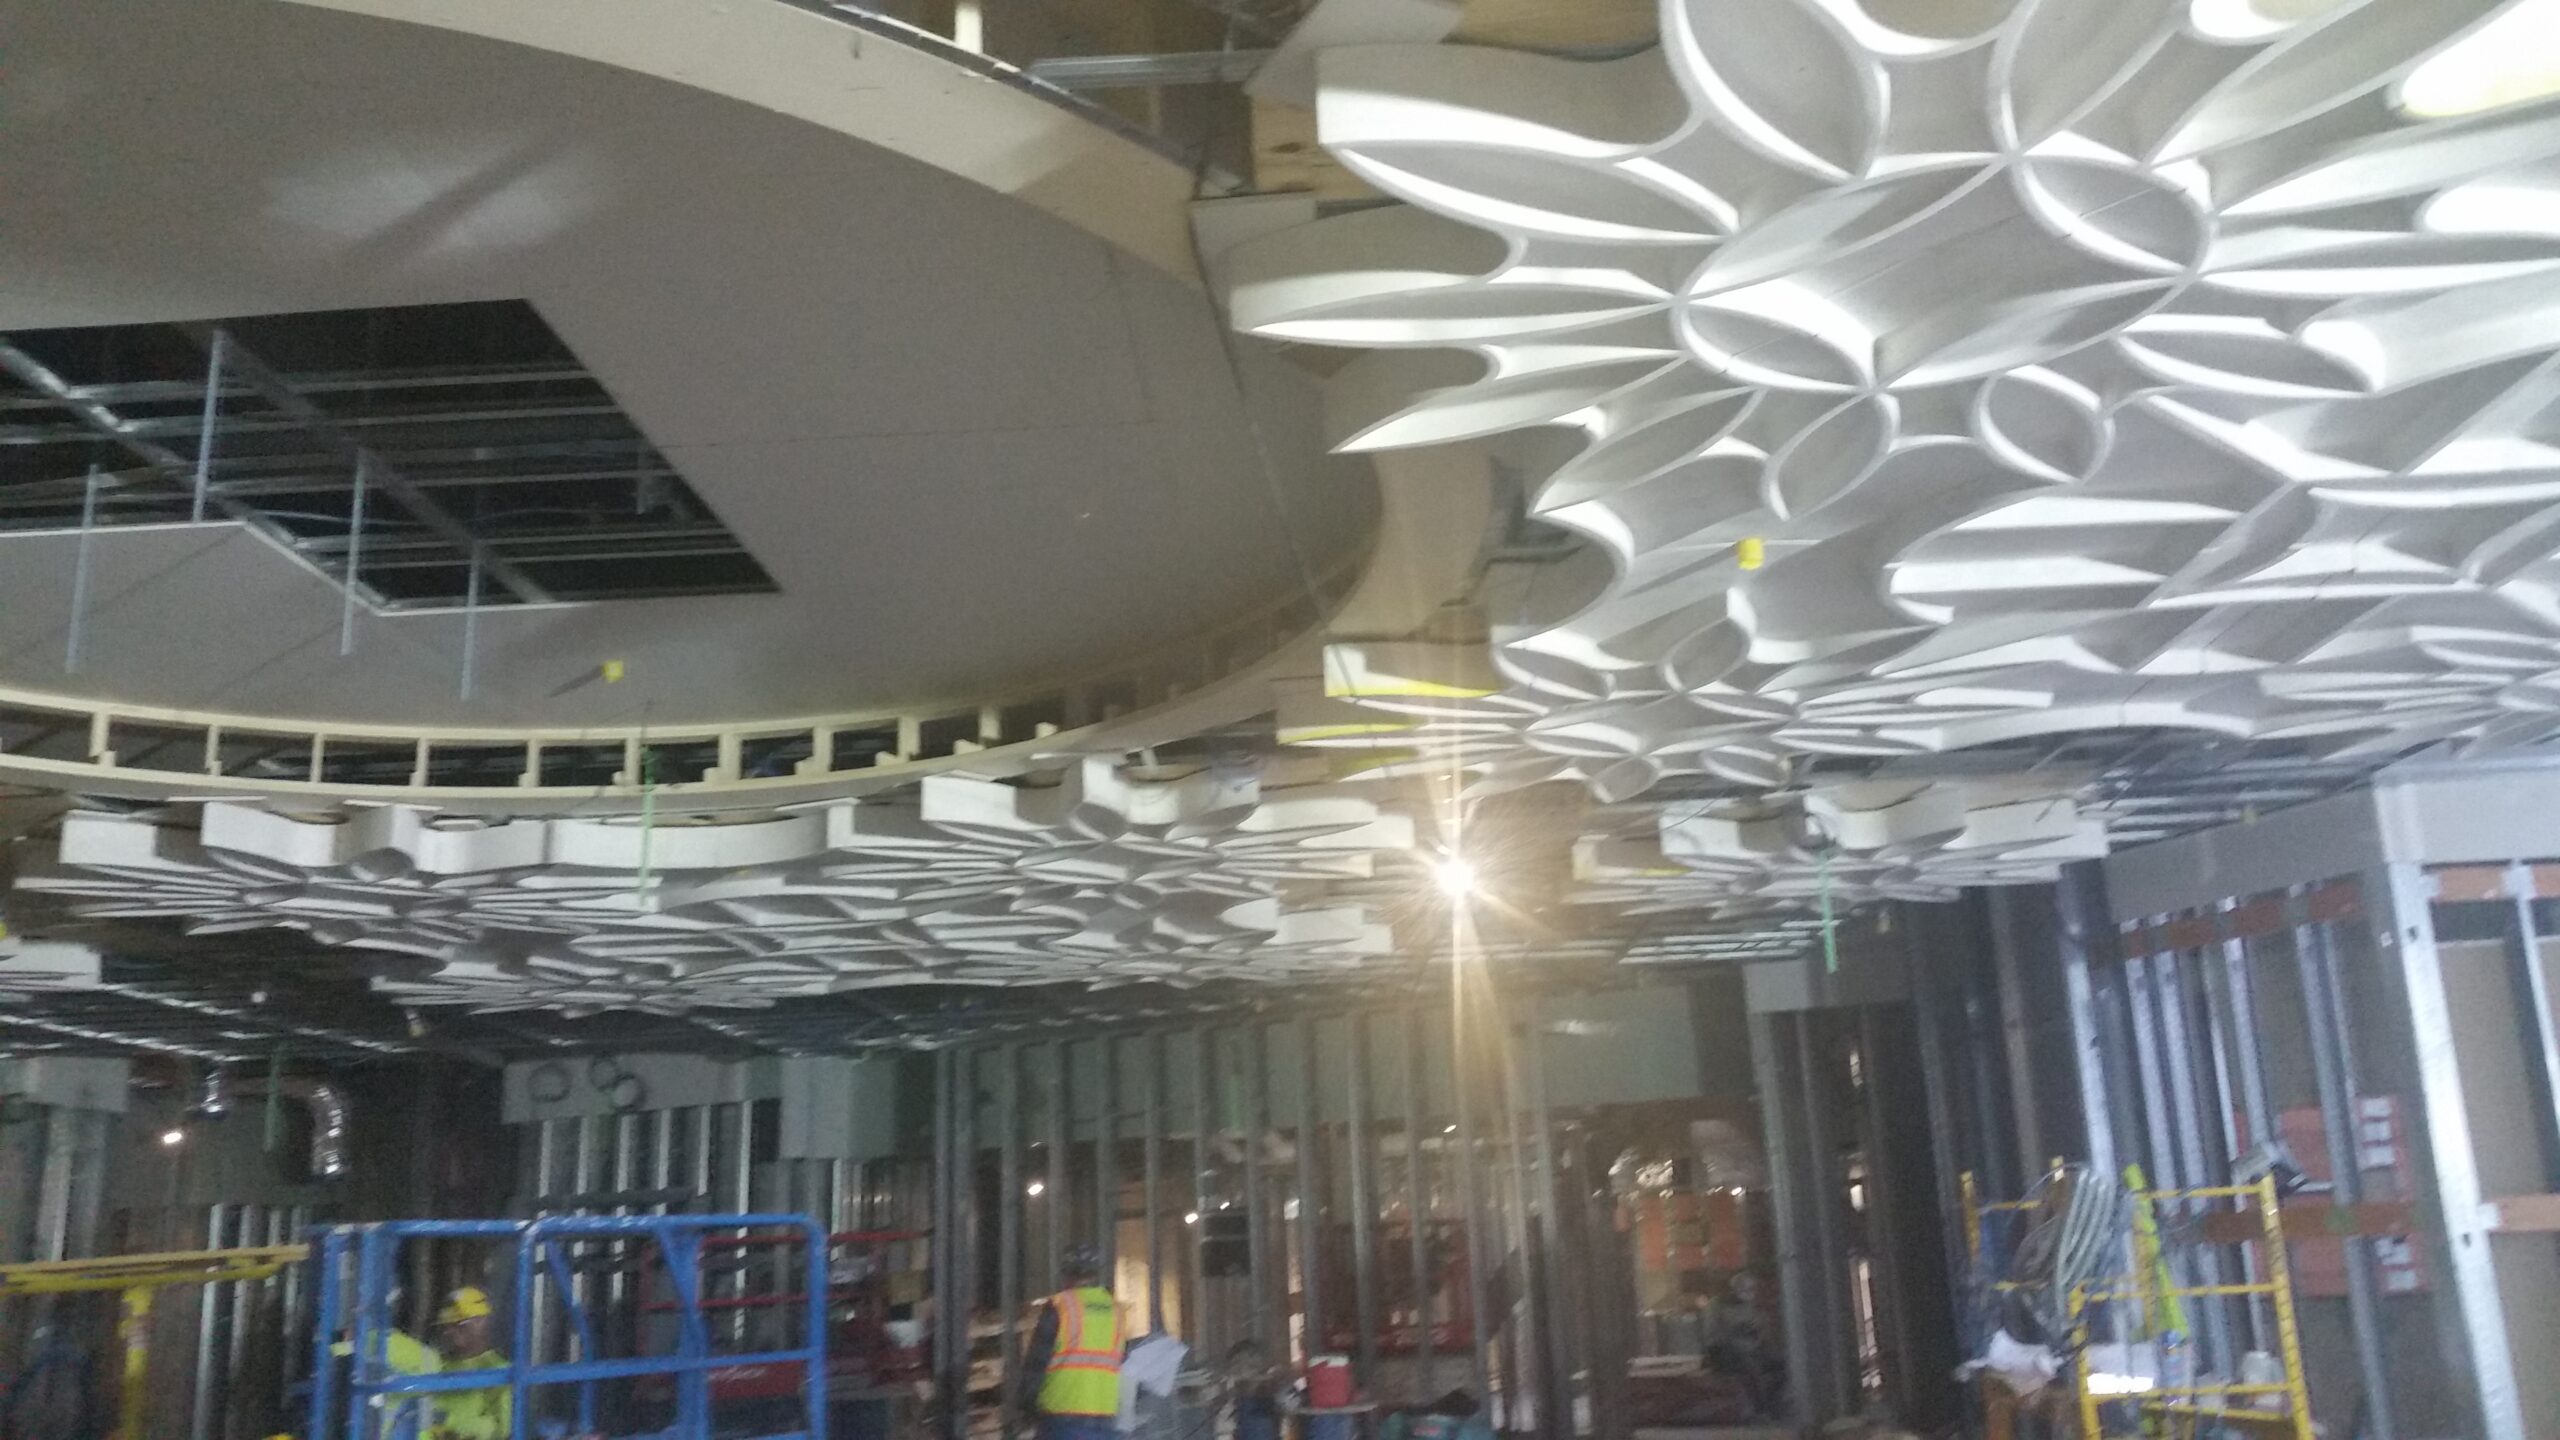 Acoustic and Specialty Ceilings